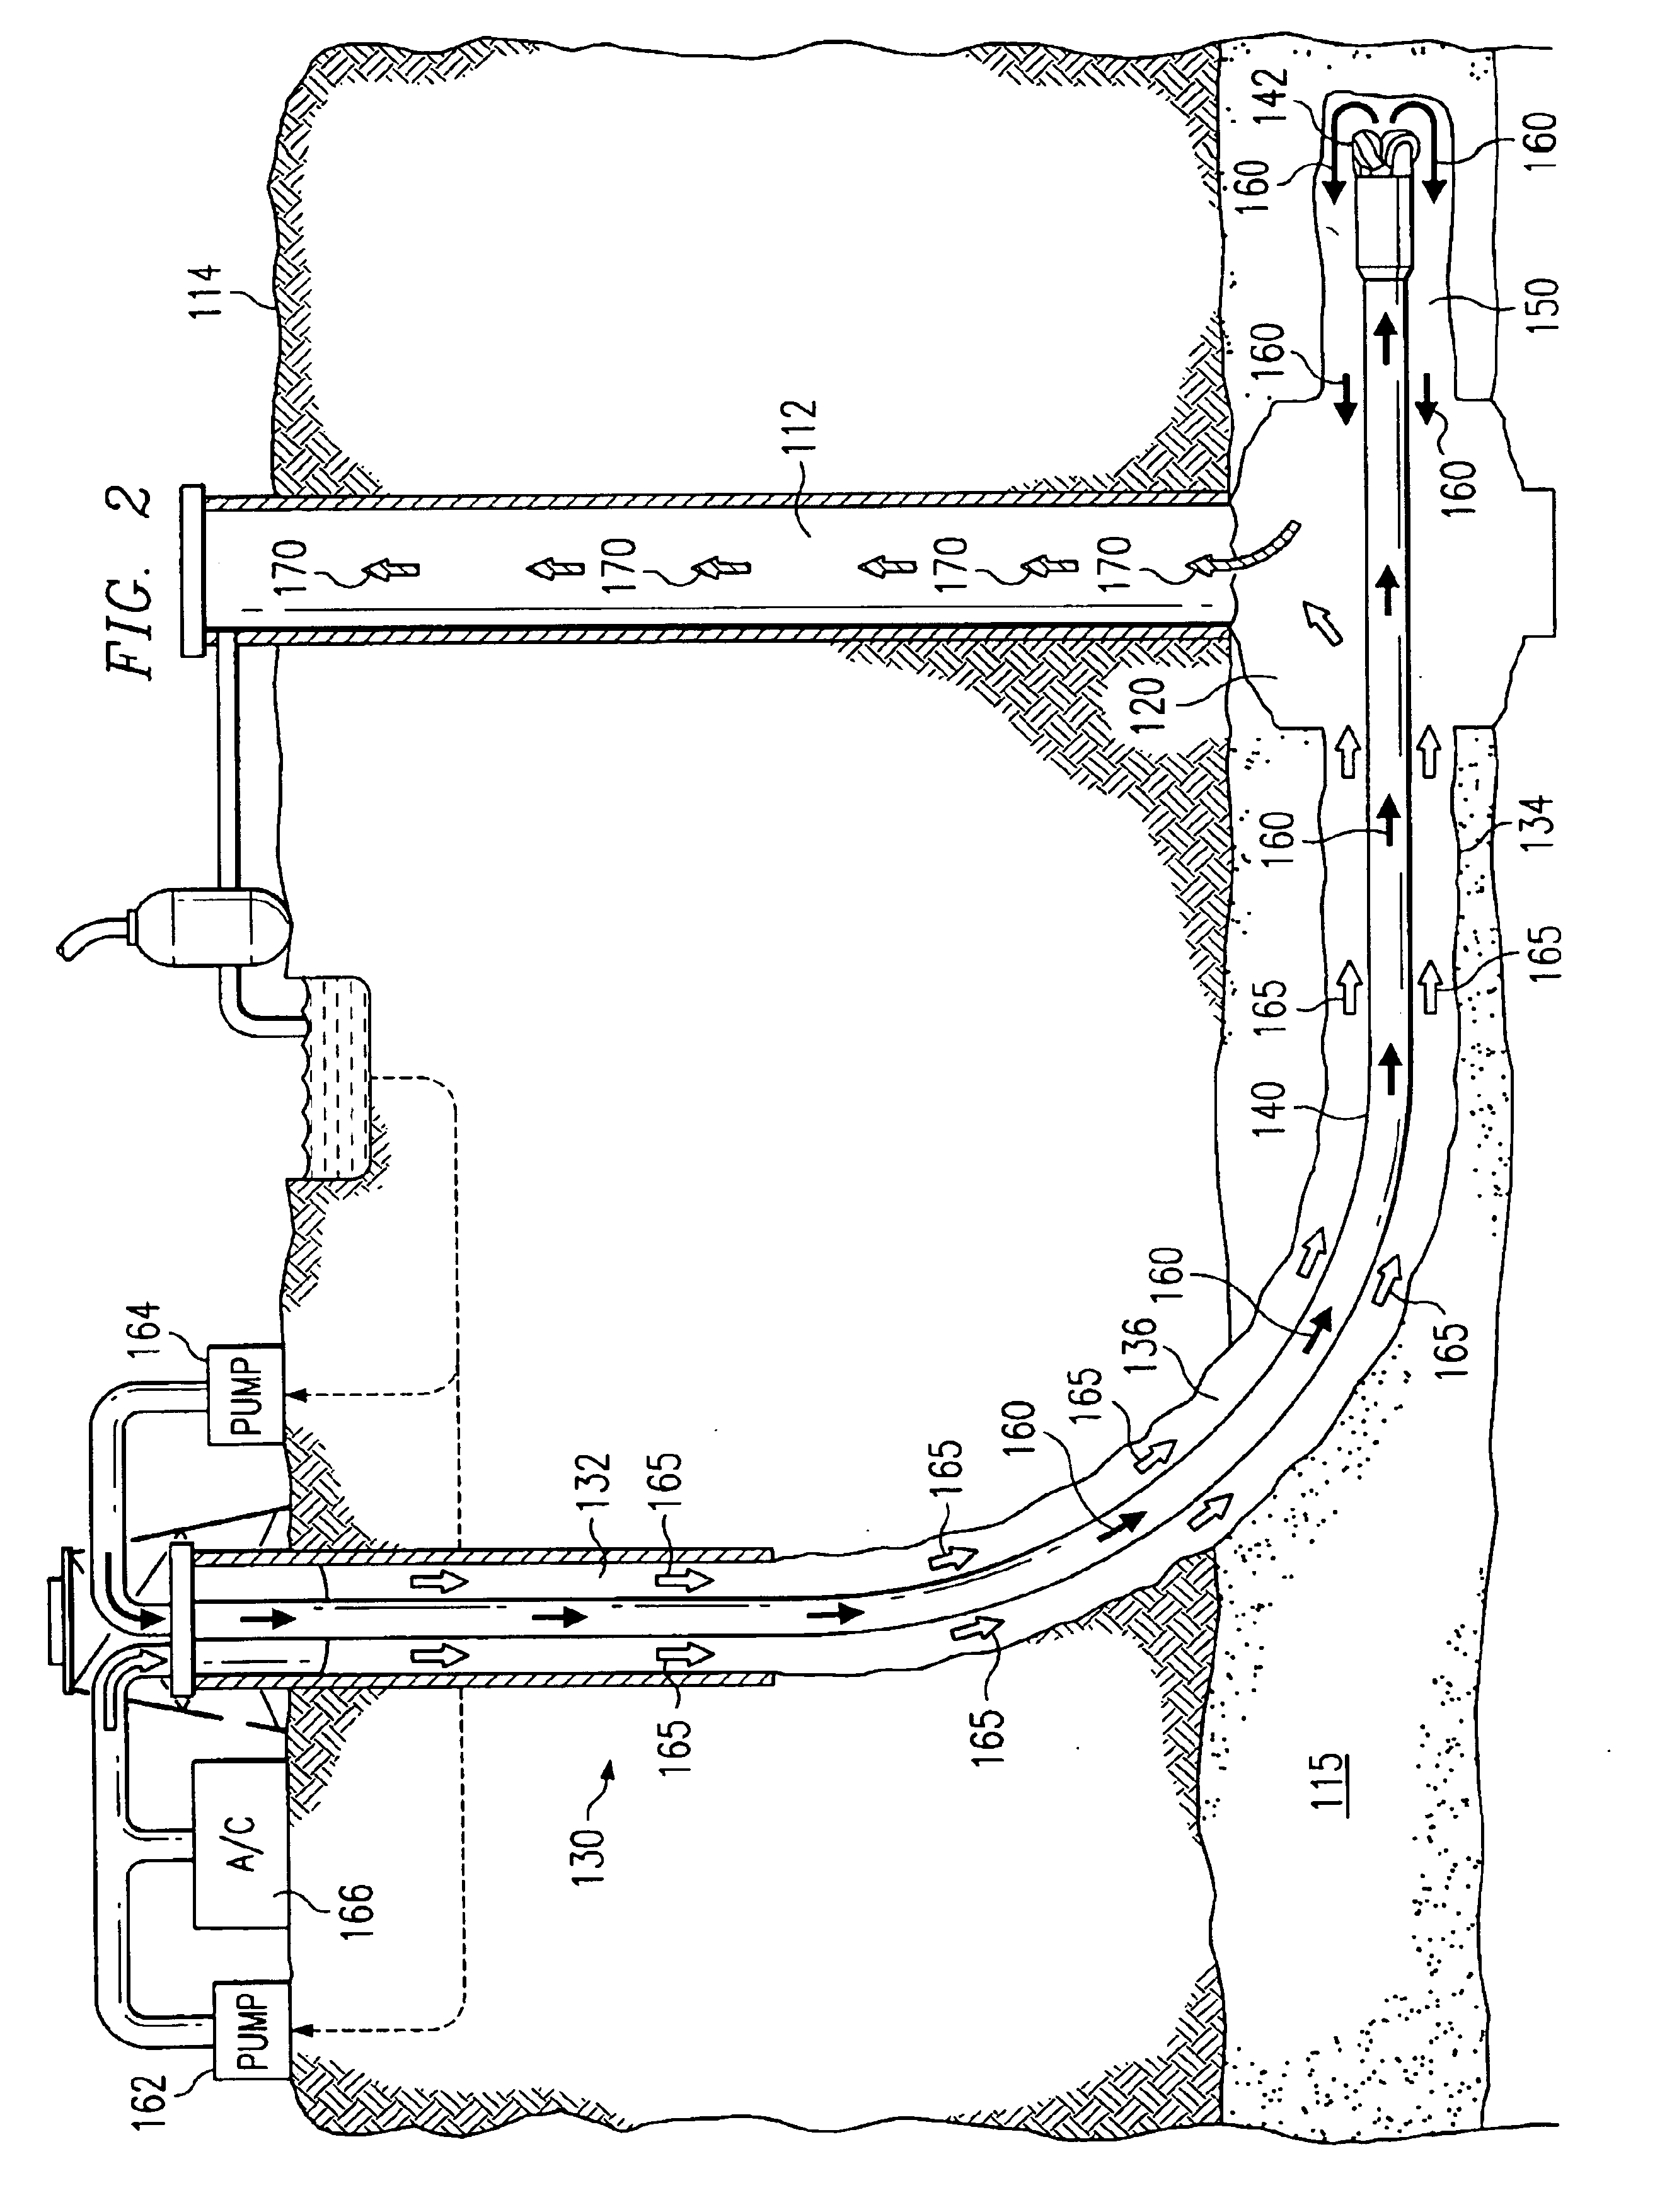 Method and system for controlling pressure in a dual well system